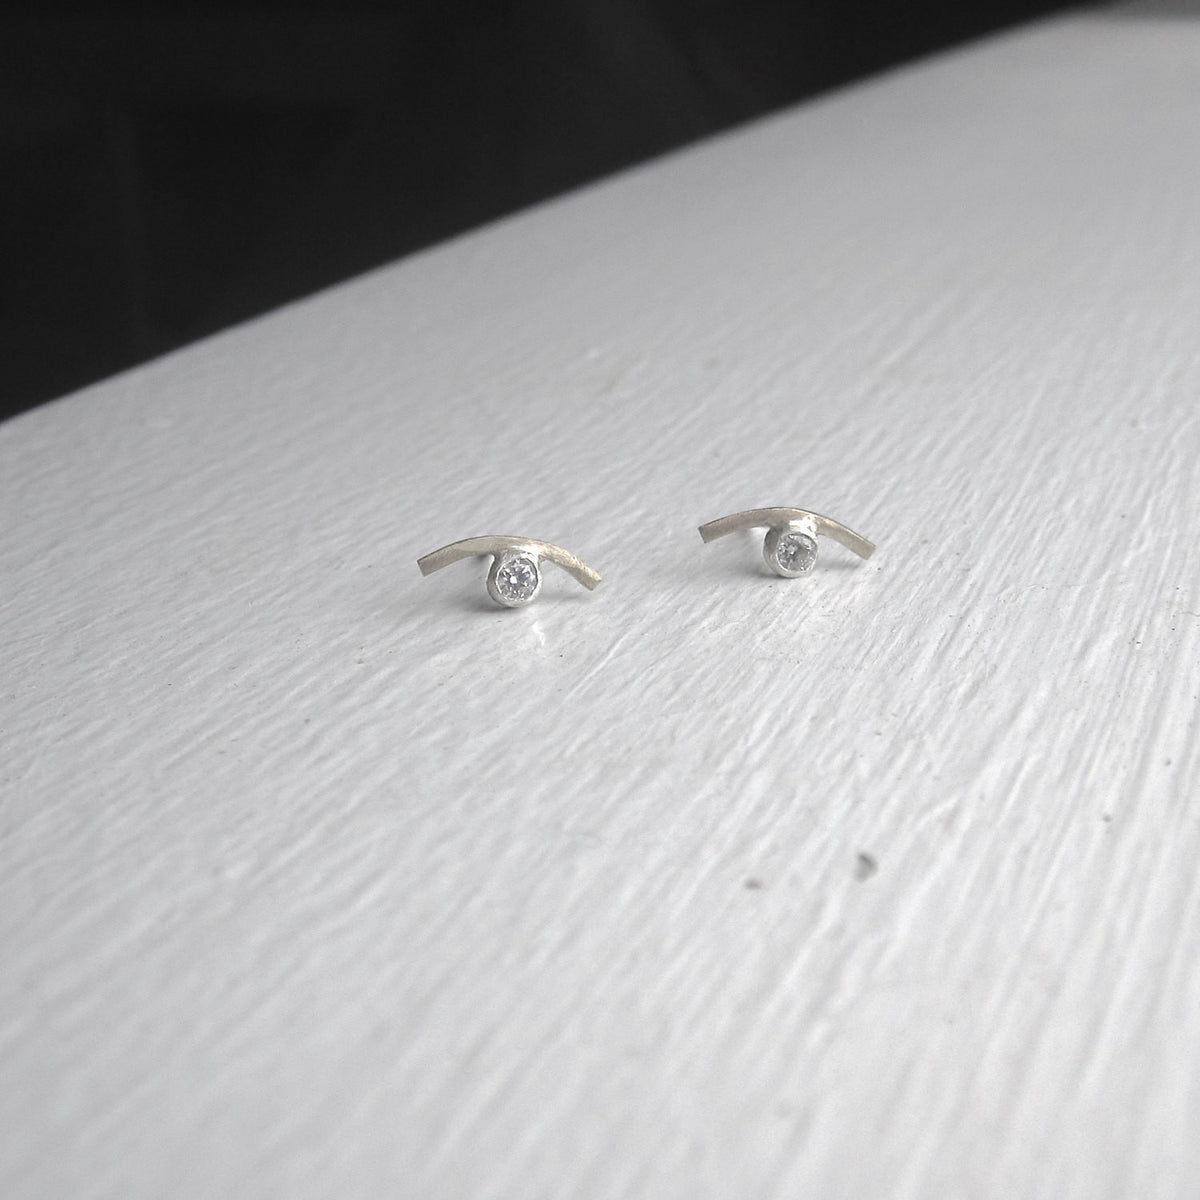 A Modern Classic - Hand-Made Sterling Silver Curved Studs With A Clear Stone - 0161 - Virginia Wynne Designs